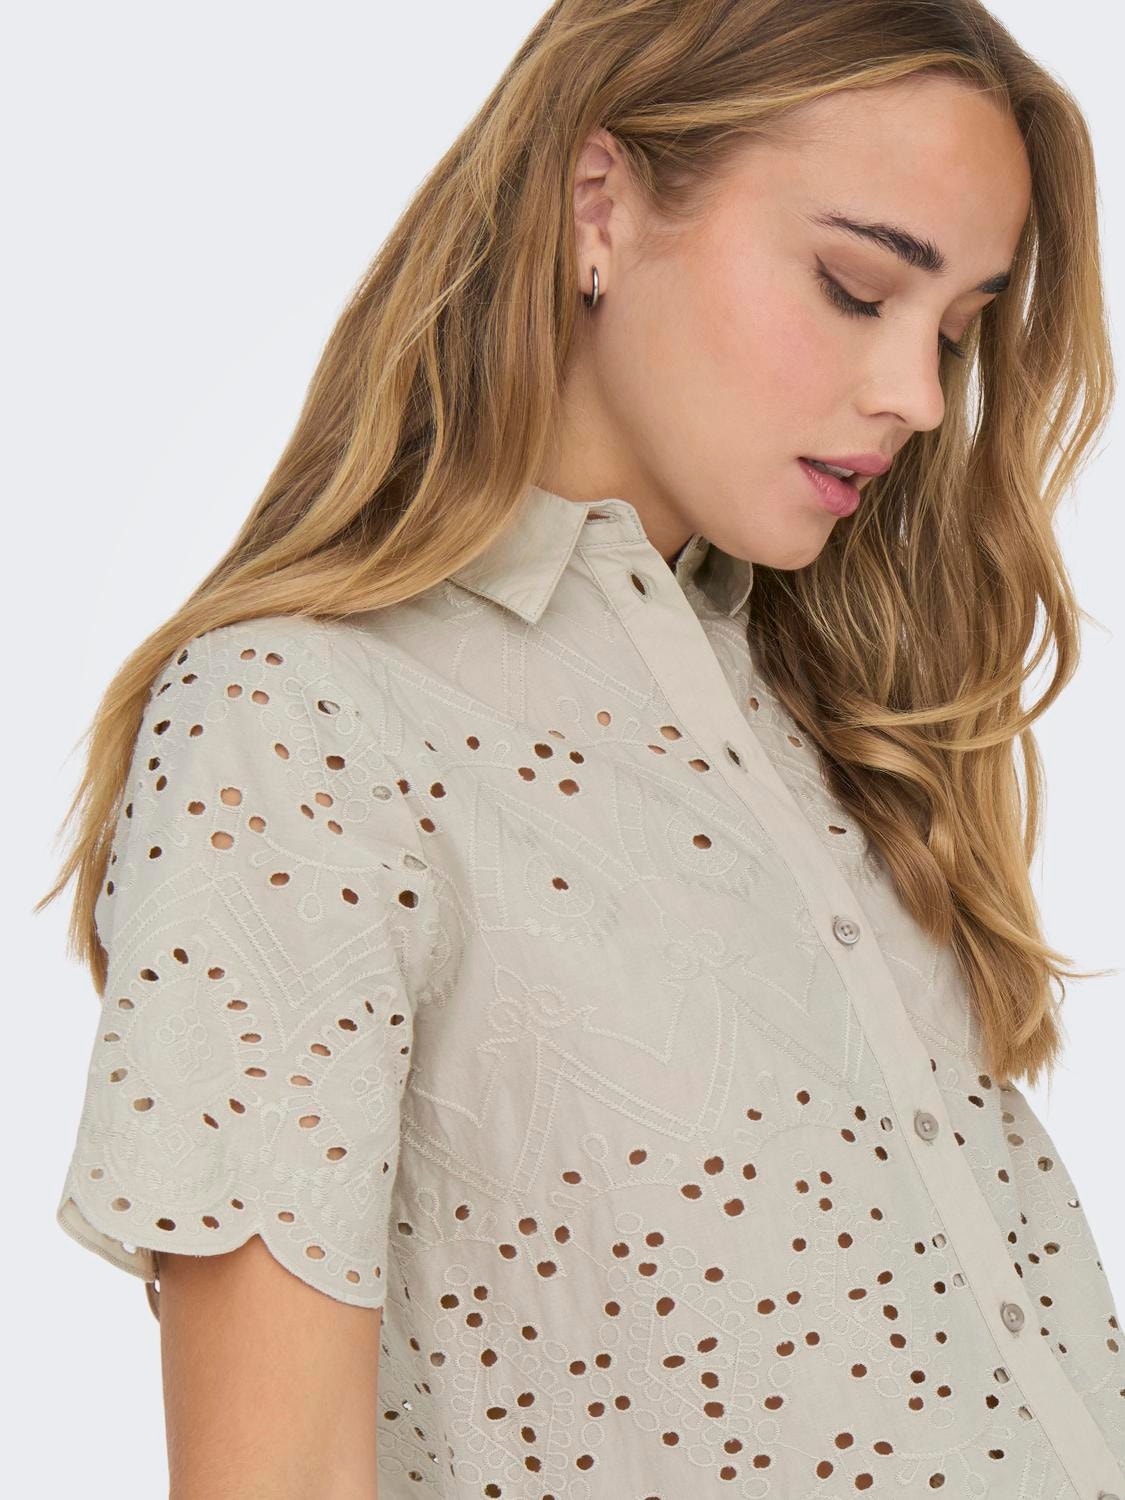 ONLY Broderie anglaise shirt -Silver Lining - 15318650